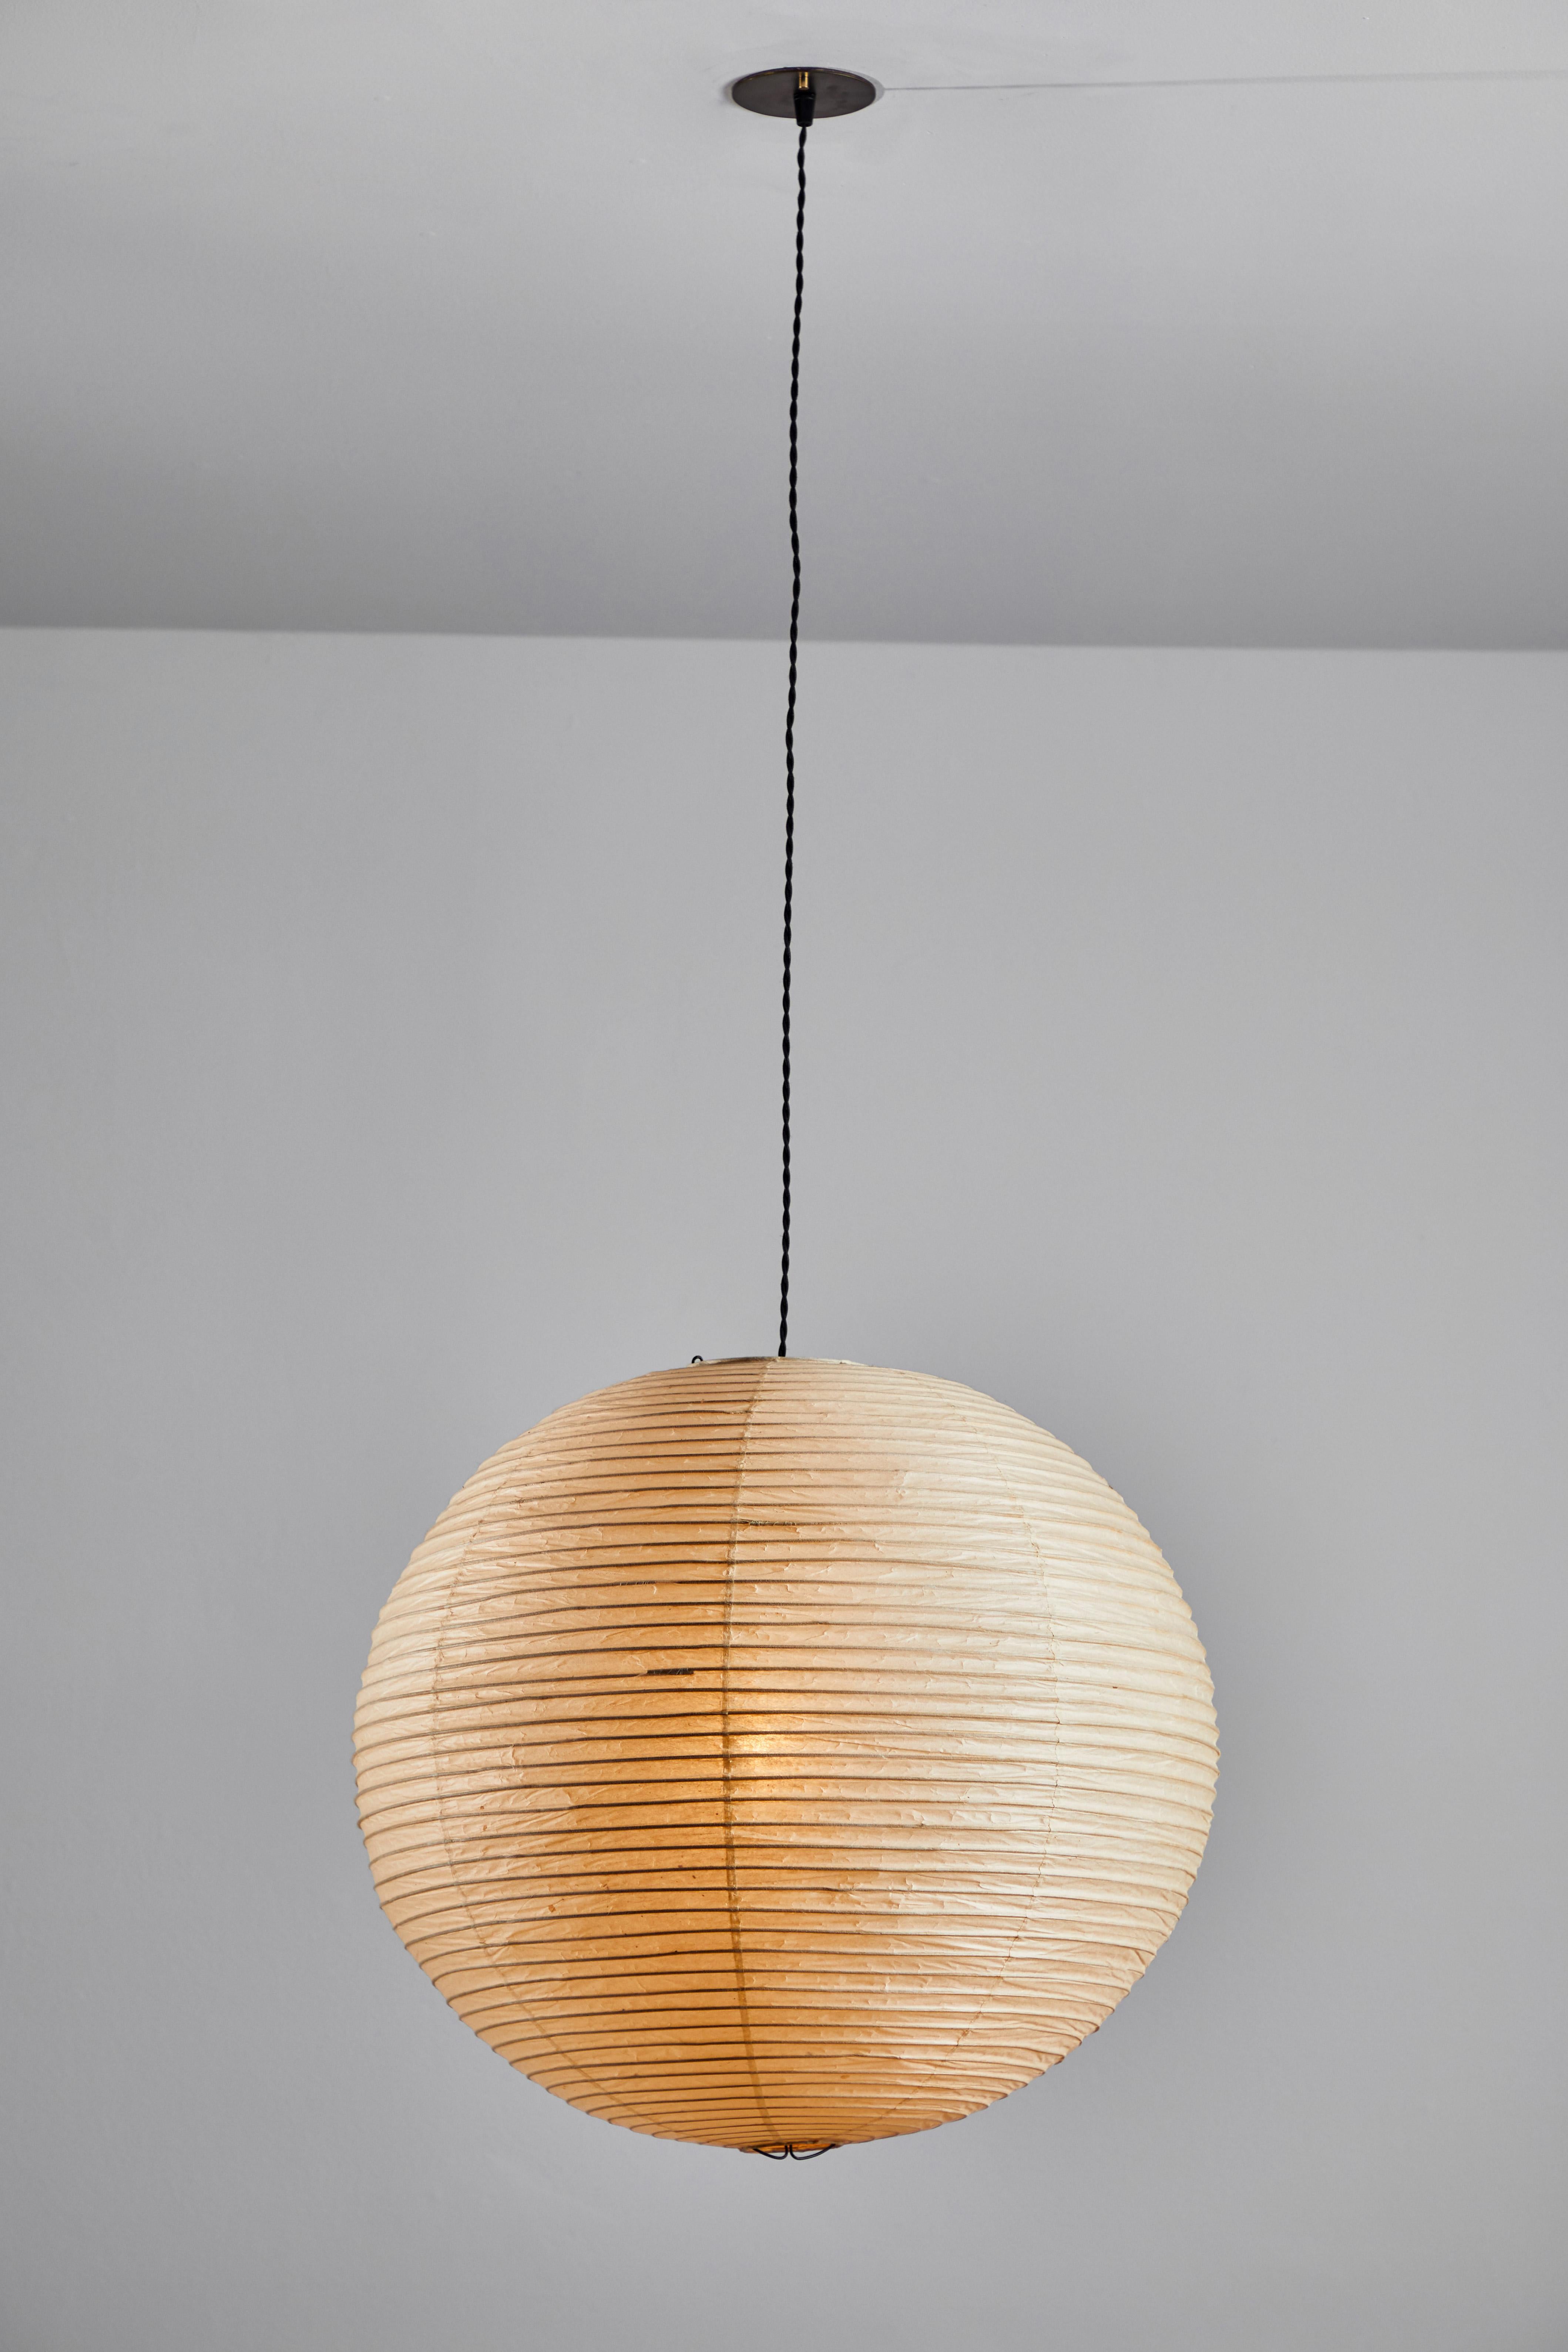 Early and Rare Model 19A Light Sculpture by Isamu Noguchi for Akari. Manufactured in Japan, 1951. Rice paper, bamboo, steel wire. Early sun/moon stamp. Model 19A , easily identified by the suffix ‘A’. was the the first sphere shaped light in the